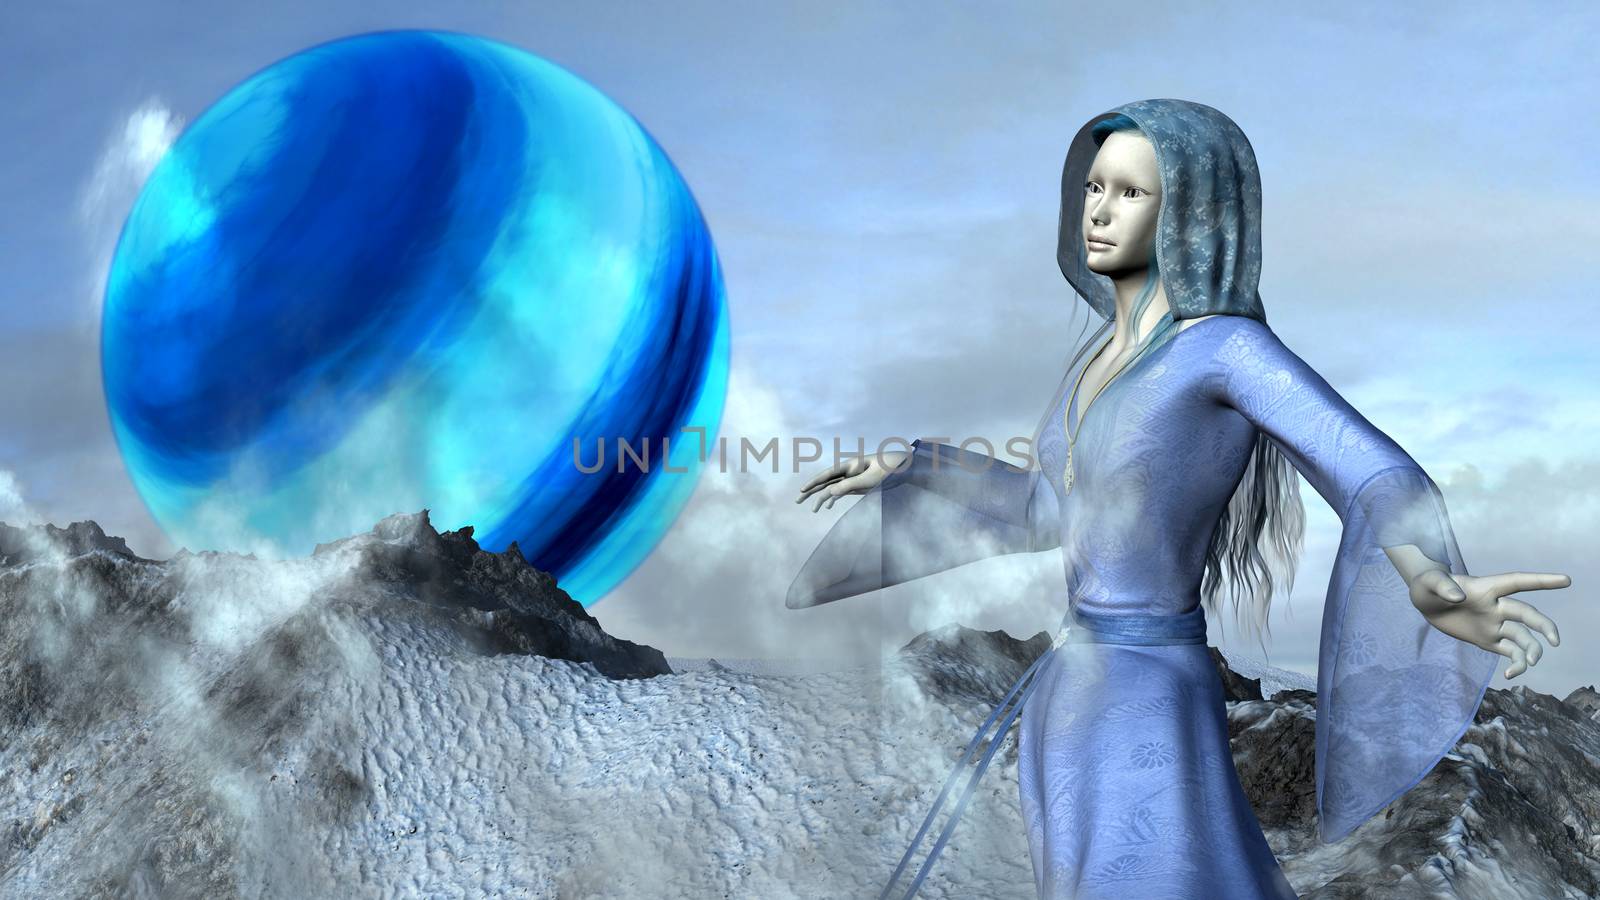 Fantasy princess elf in waving blue dress flying over the mountains with background of a big blue planet